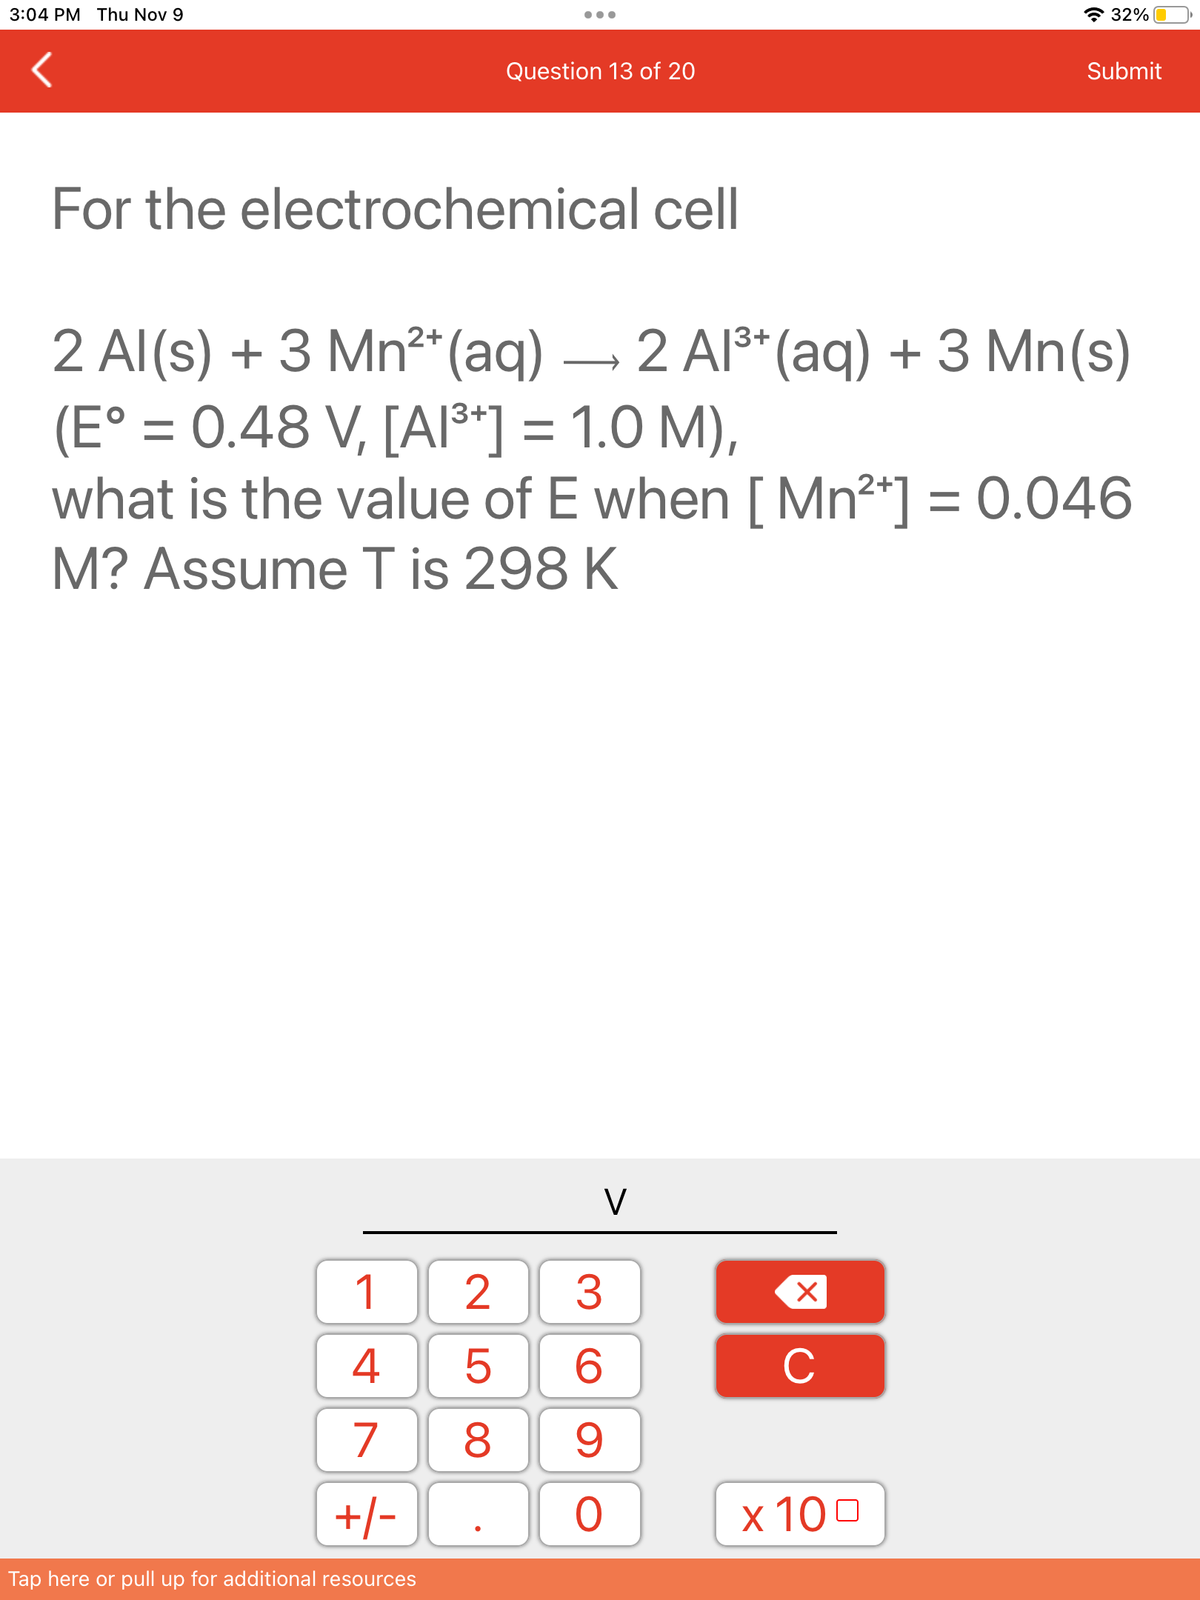 3:04 PM Thu Nov 9
For the electrochemical cell
Question 13 of 20
1
4
7
+/-
Tap here or pull up for additional resources
25
2+
13+
2 Al(s) + 3 Mn²* (aq) → 2 Al³+ (aq) + 3 Mn(s)
(E° = 0.48 V, [A1³+] = 1.0 M),
what is the value of E when [ Mn²+] = 0.046
M? Assume T is 298 K
V
3
6
8 9
O
X
C
32%
x 100
Submit